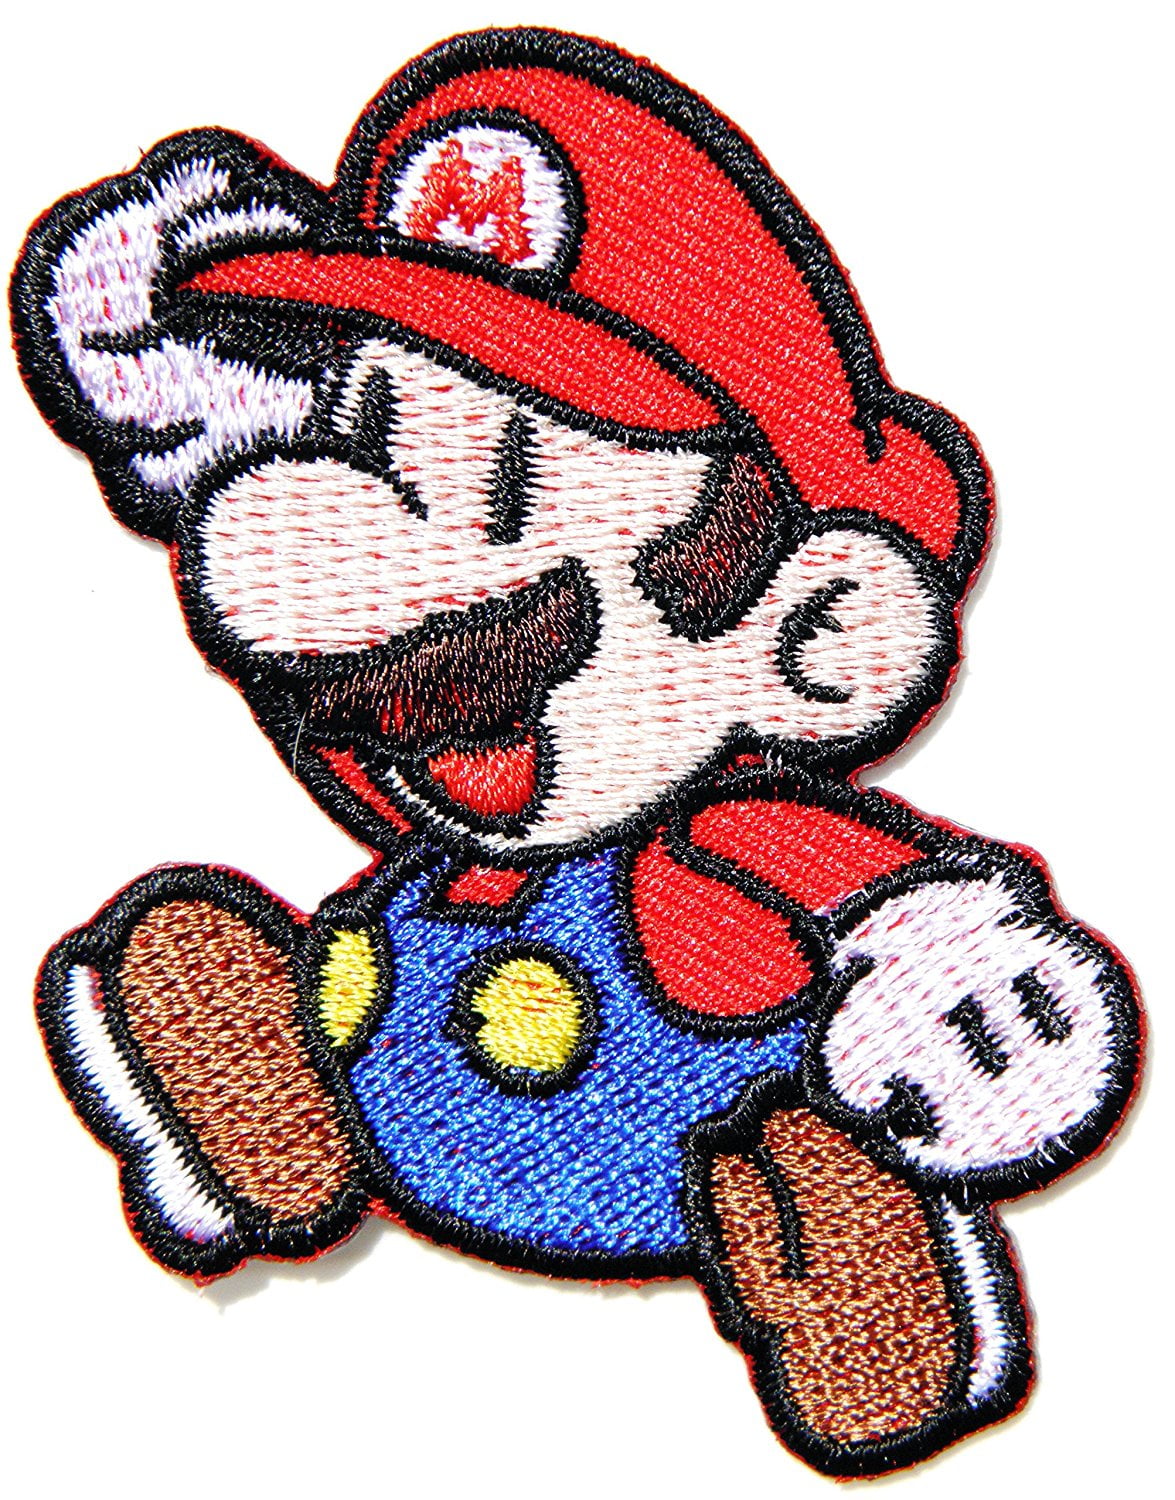 9 cm Super Mario Brothers Embroidered Iron or Sew on Badge Applique Souvenir Retro DIY Costume World Kart All Stars Snes Mario Patch